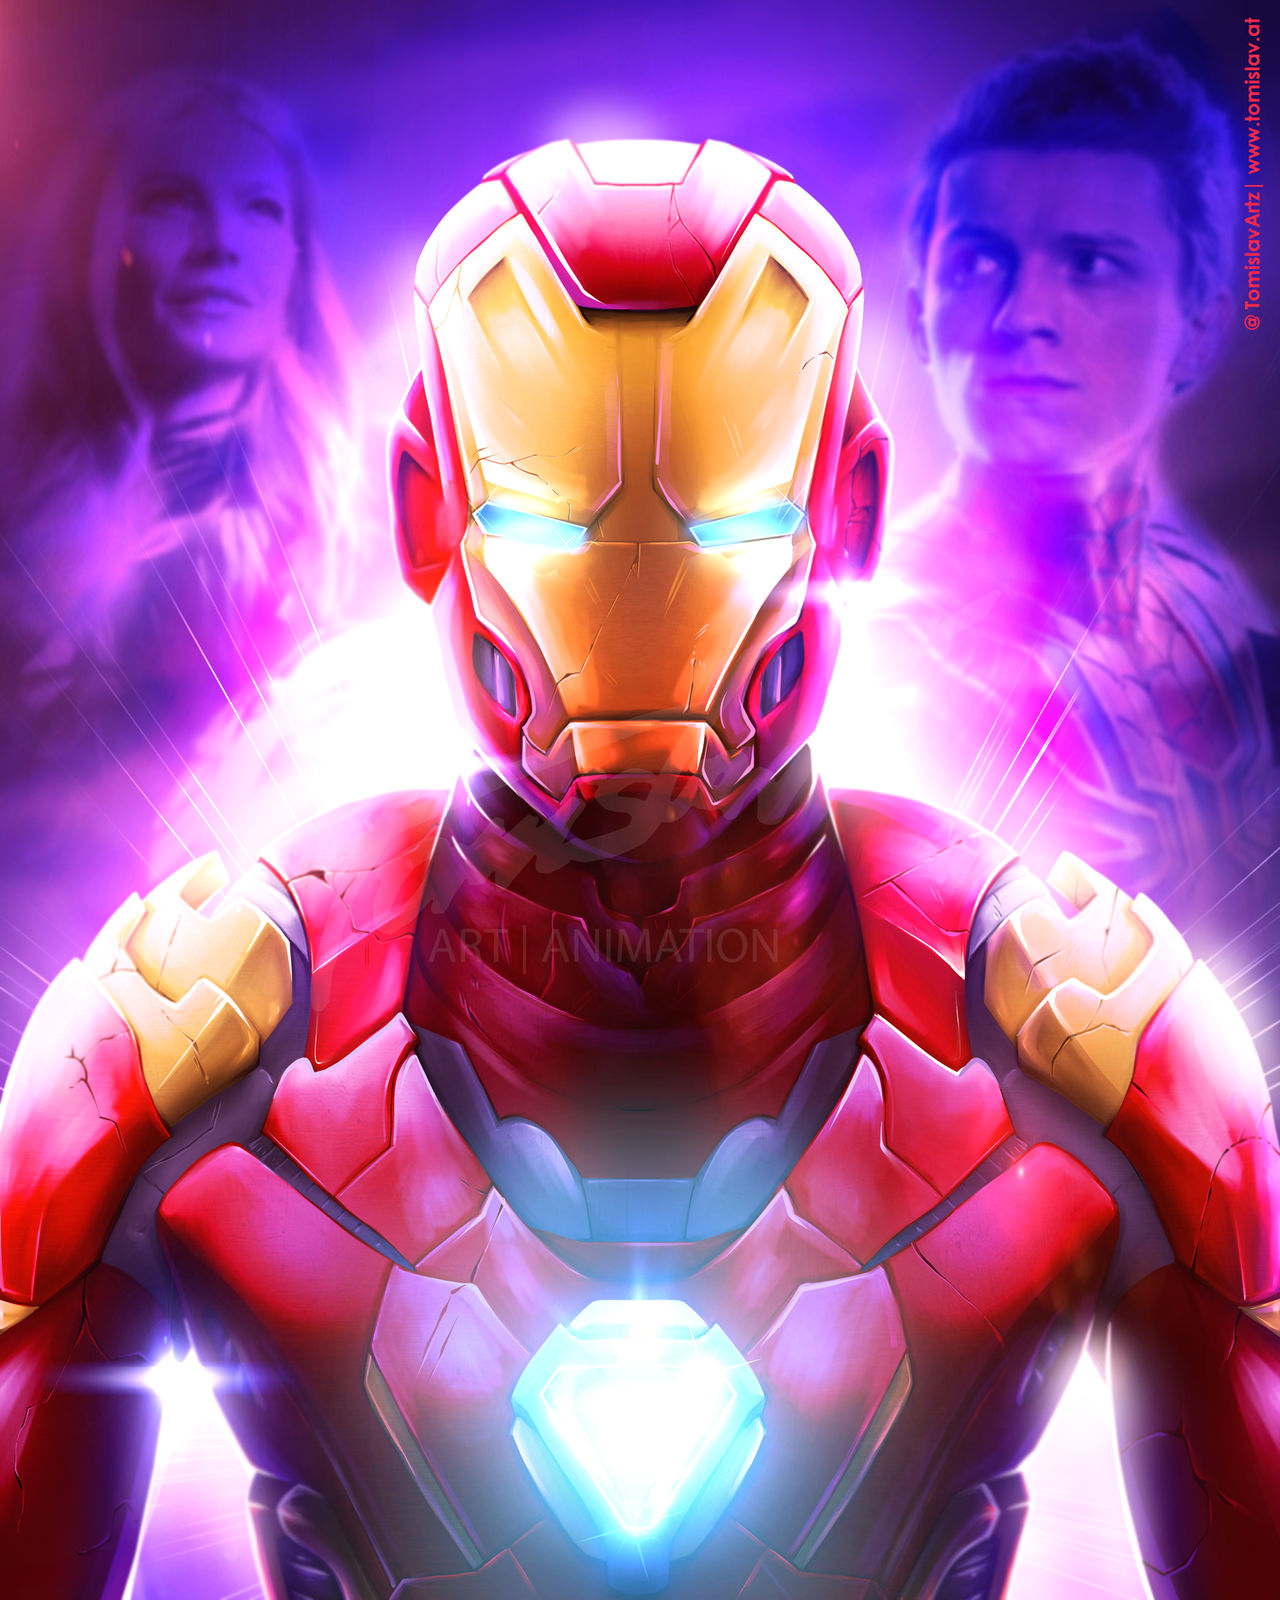 Poster fanart ironman in endgame [by Carpaa2011]